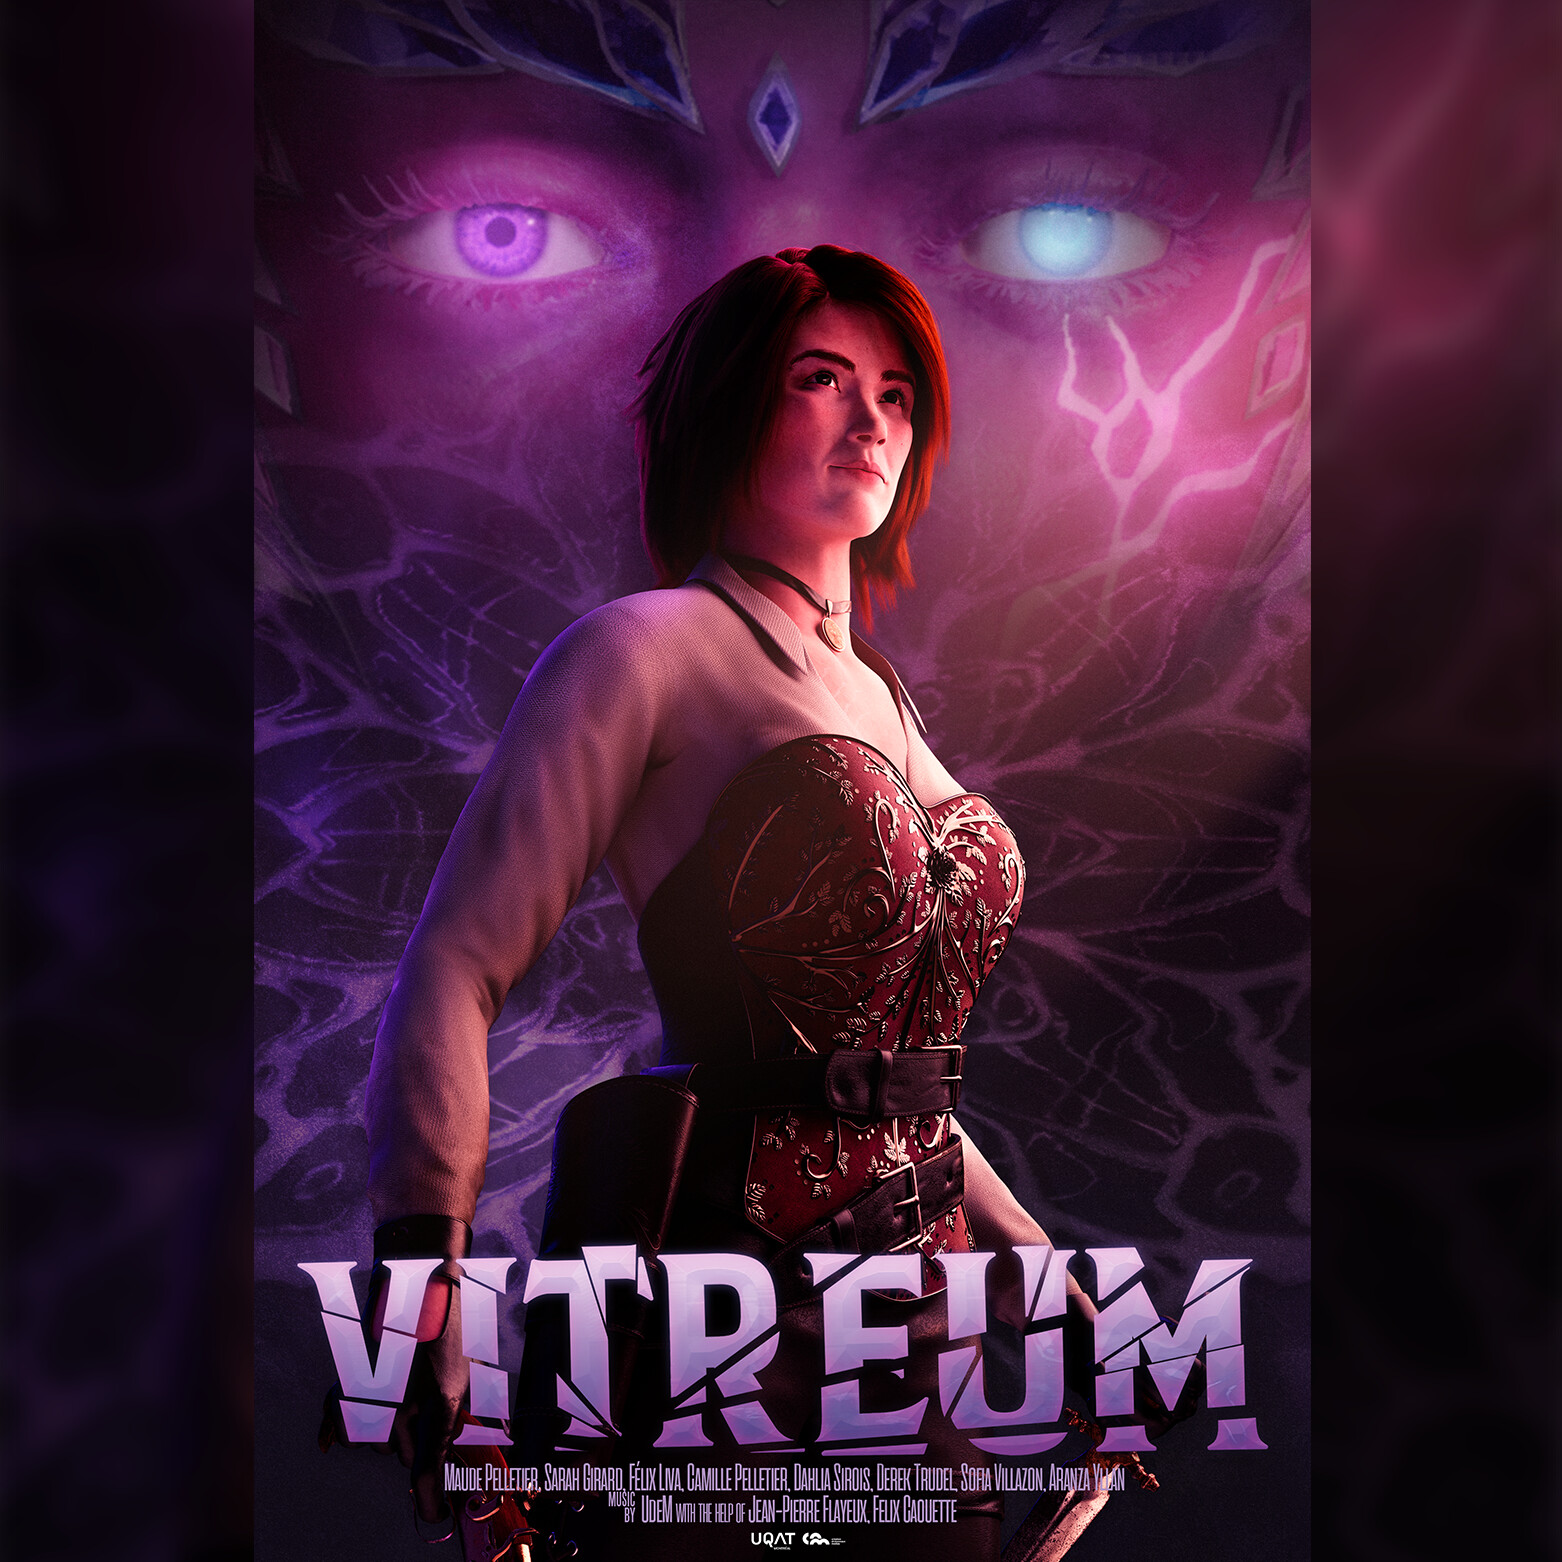 Vitreum Official Poster